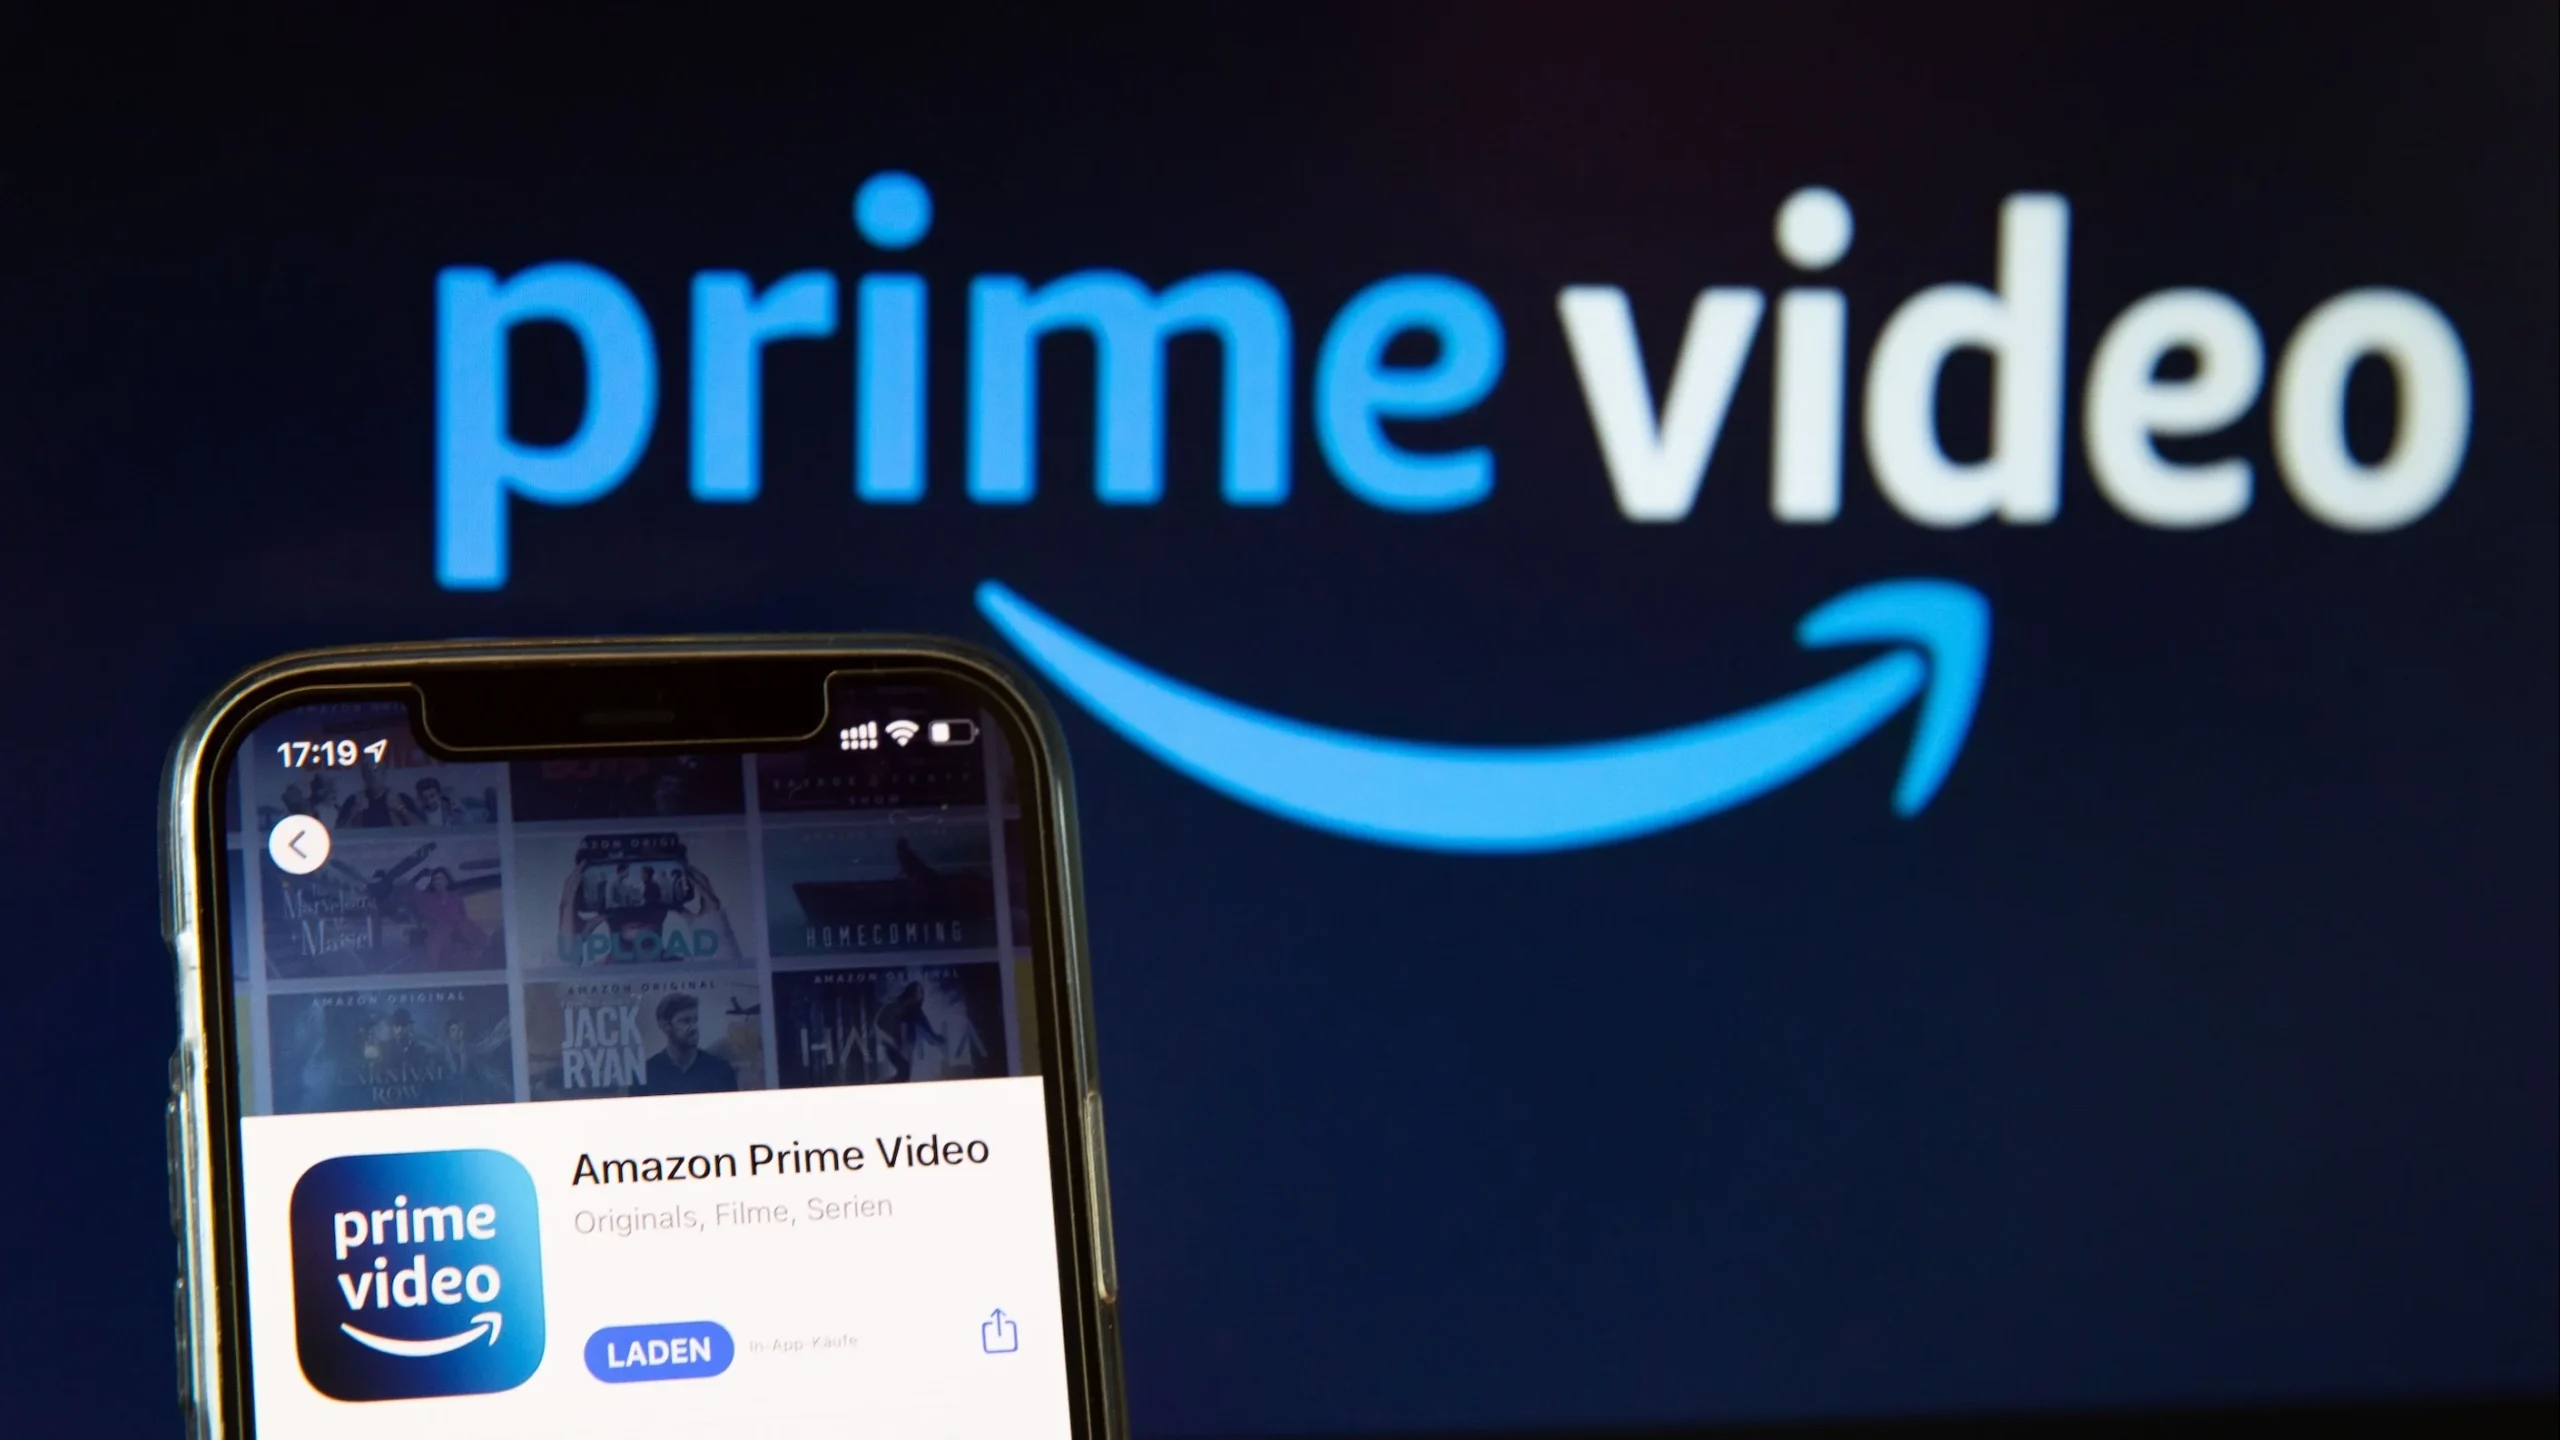 Why was Amazon Sued by a Prime Video Subscriber over Ads? Explained